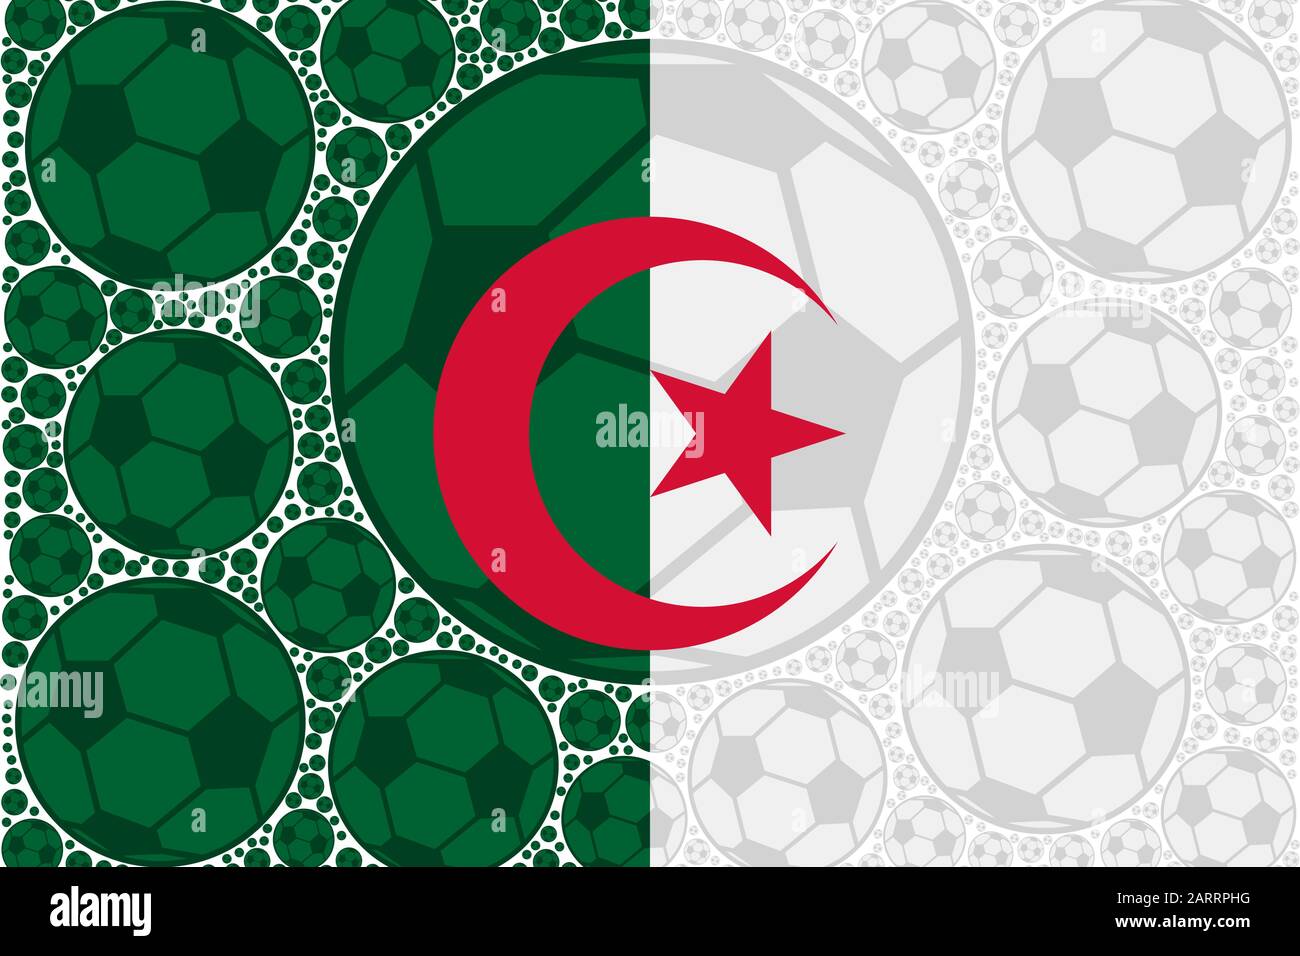 Concept illustration showing the flag of Algeria made up of soccer balls Stock Vector